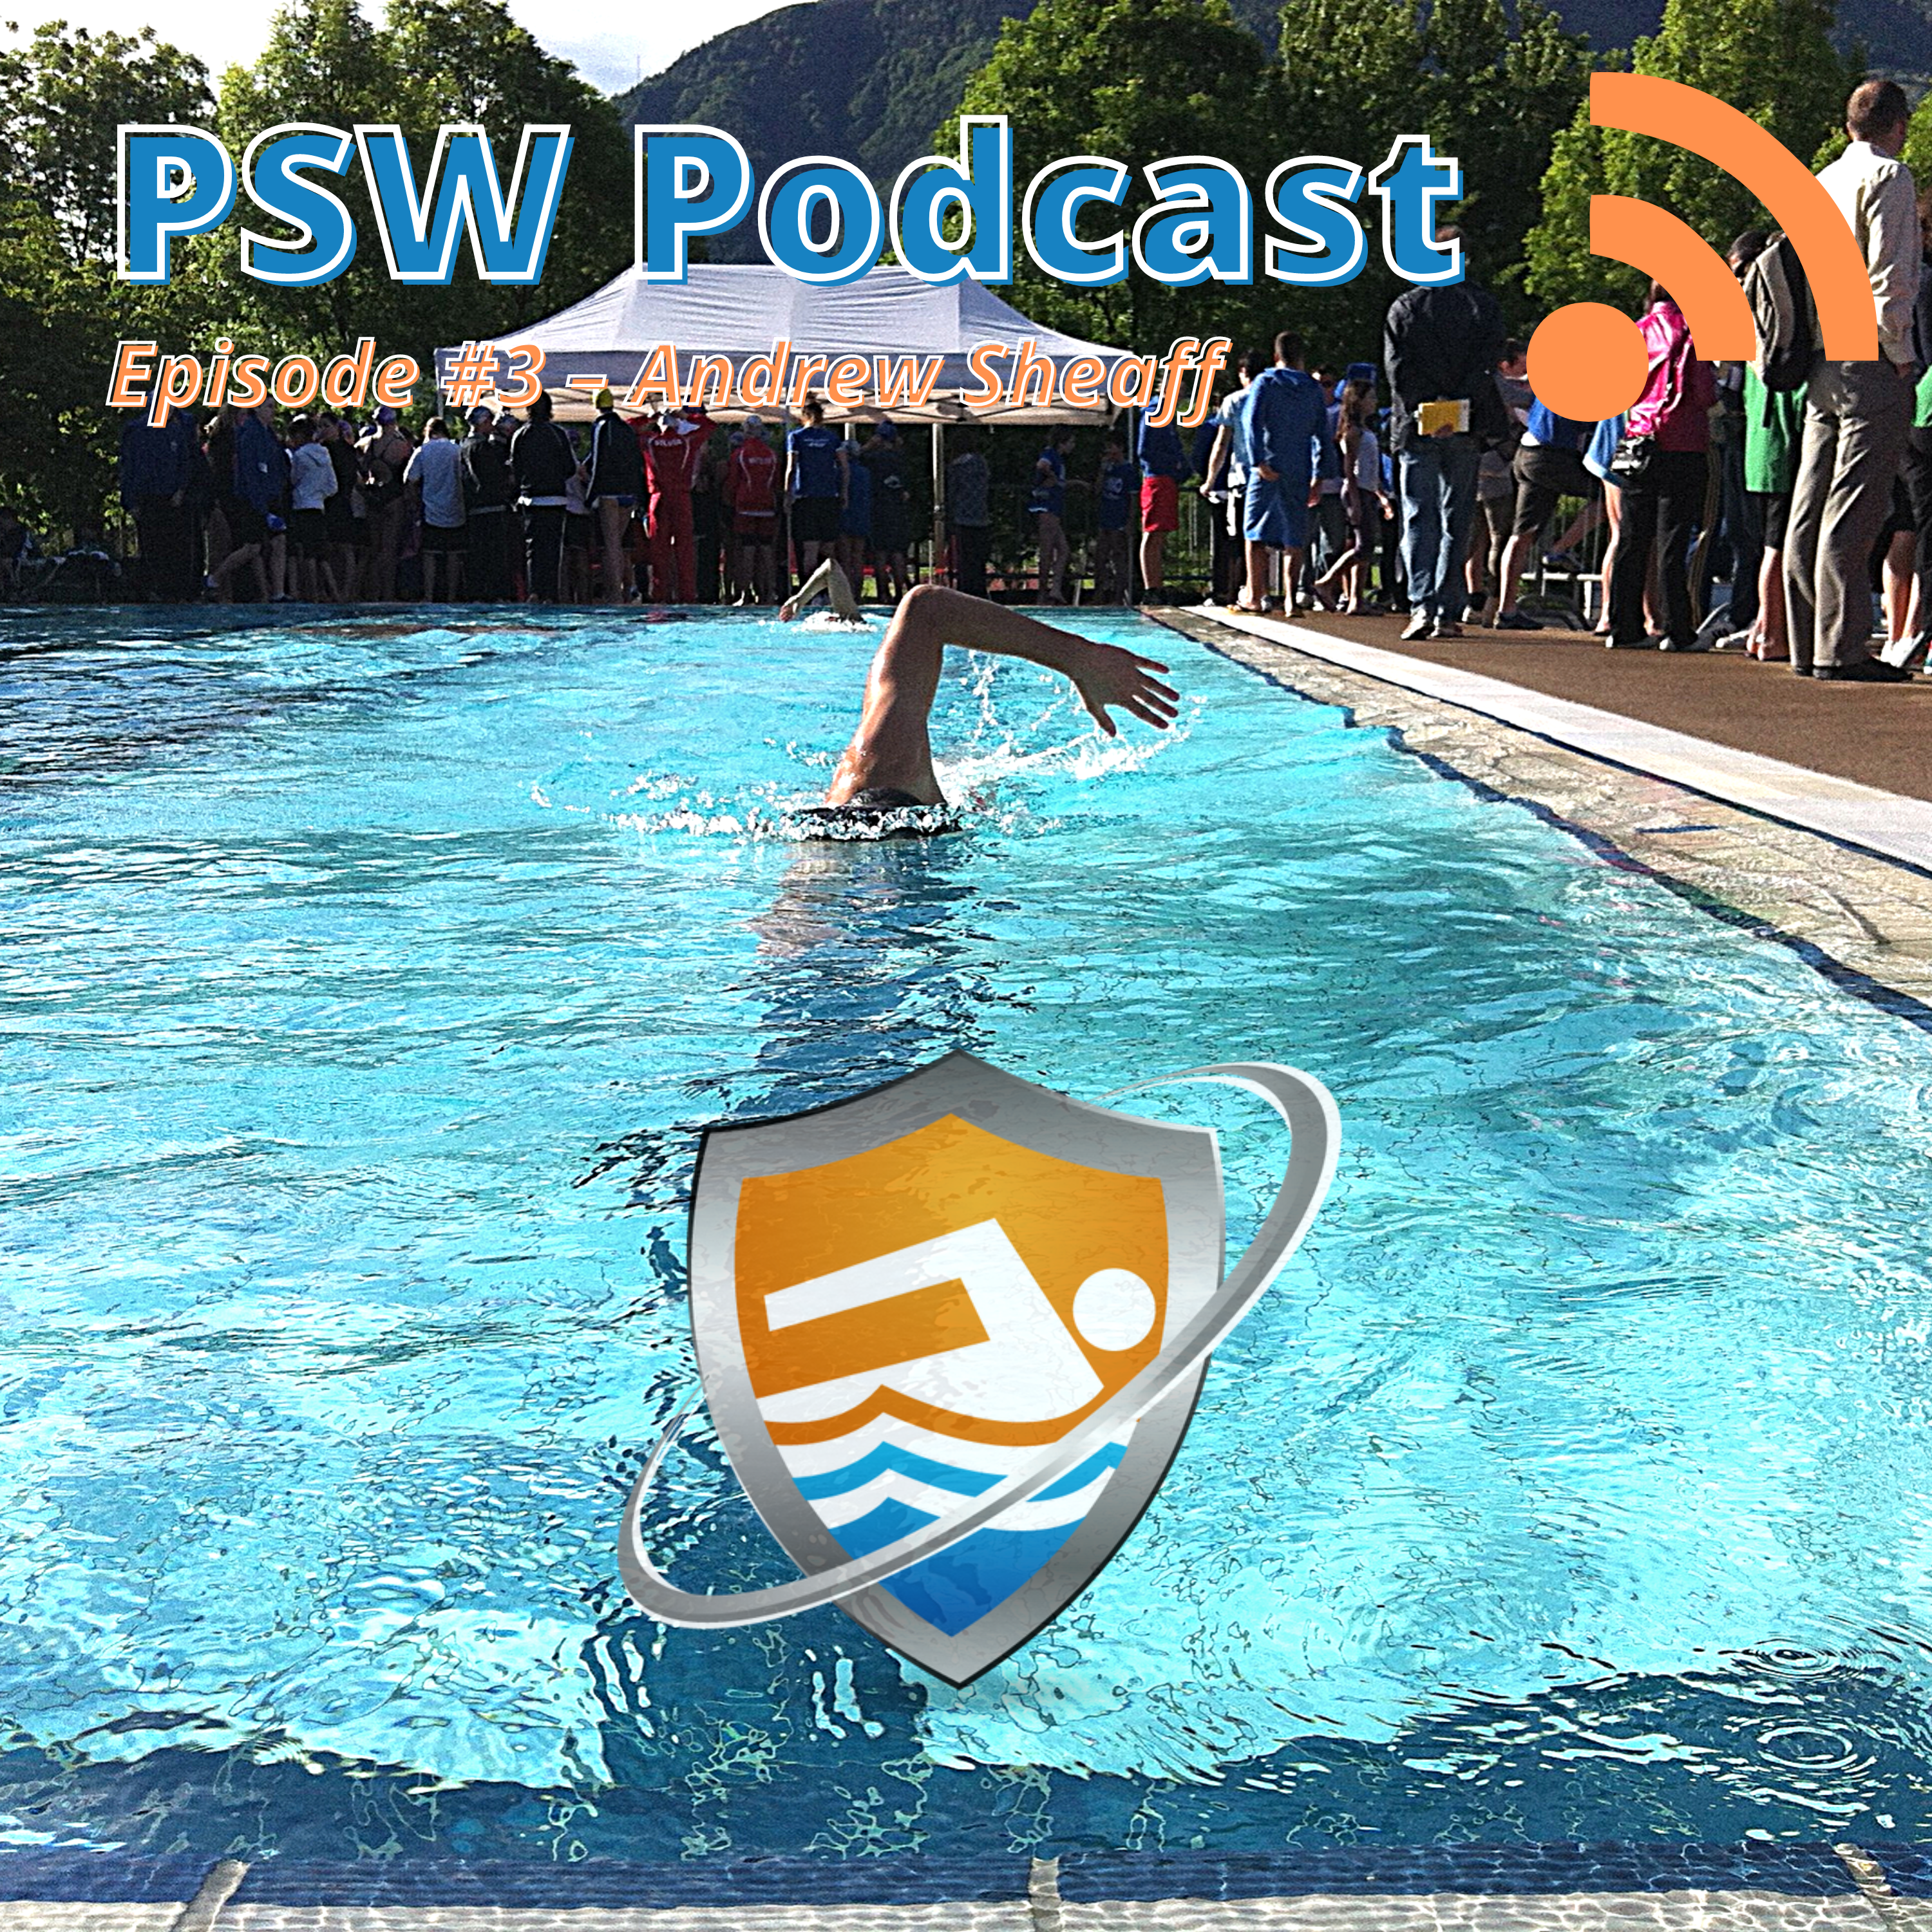 PSW Podcast – Episode 3 – Andrew Sheaff – Part 3